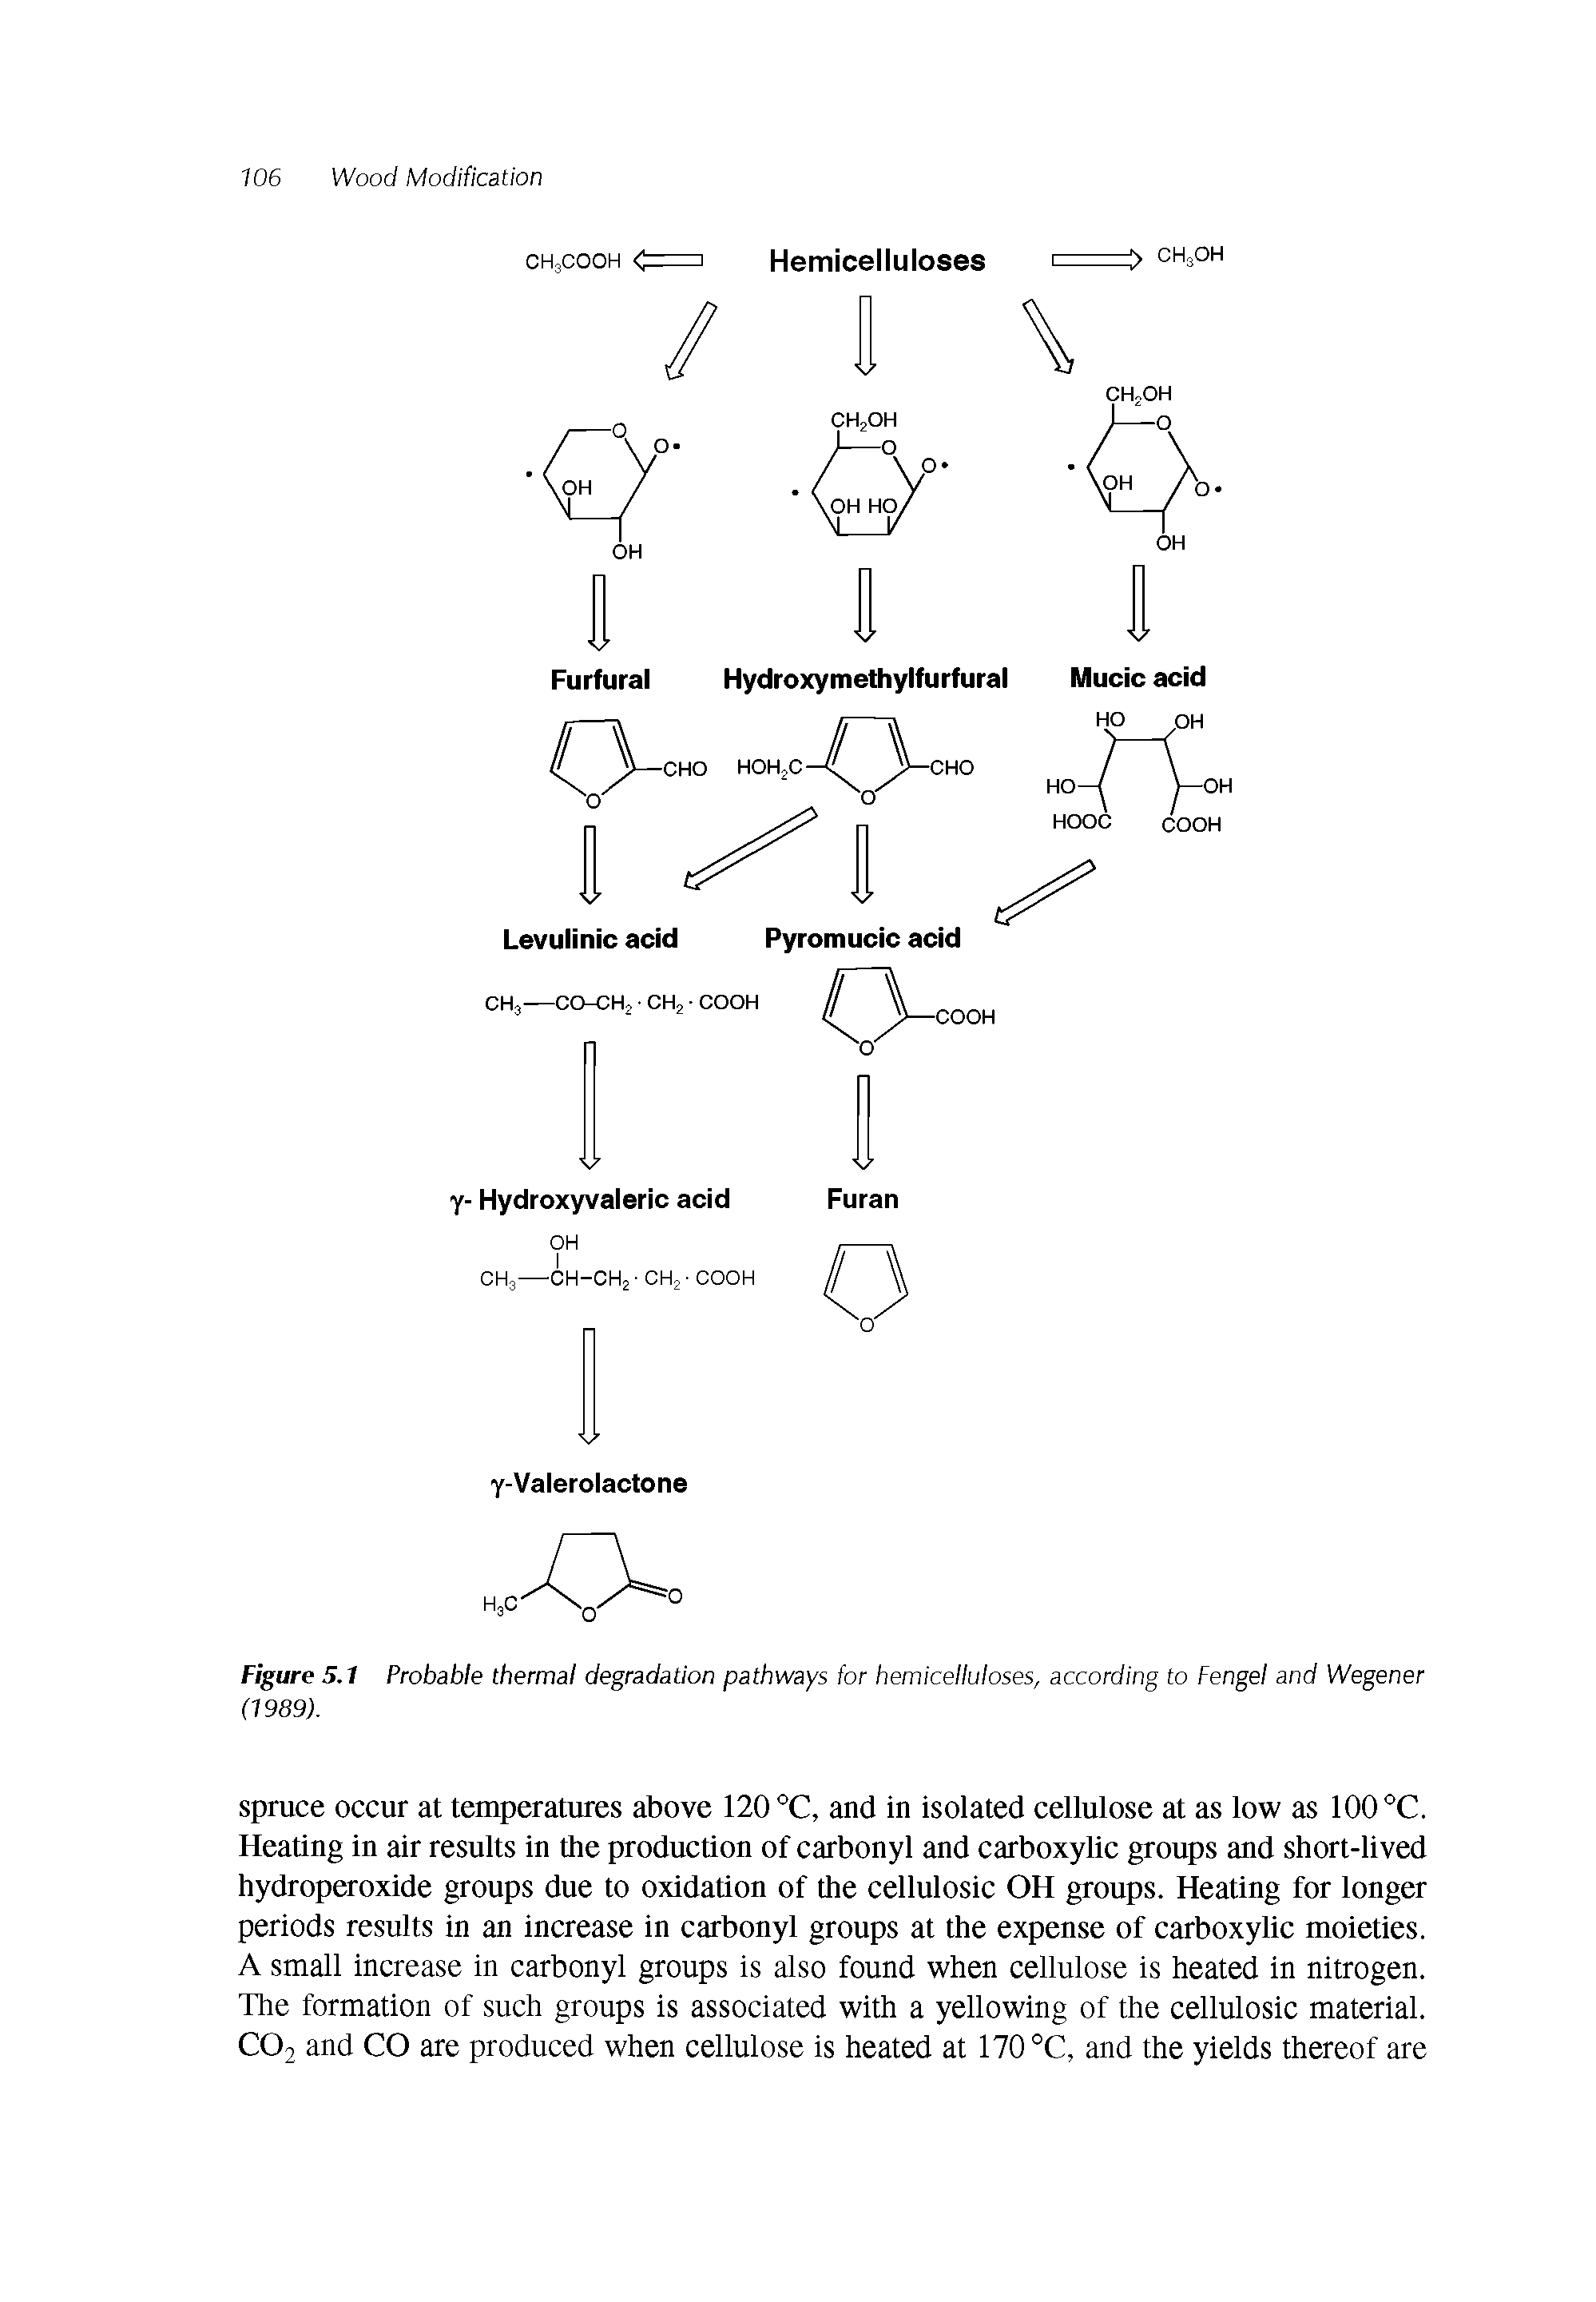 Figure 5.1 Probable thermal degradation pathways for hemicelluloses, according to Fengel and Wegener (1989).